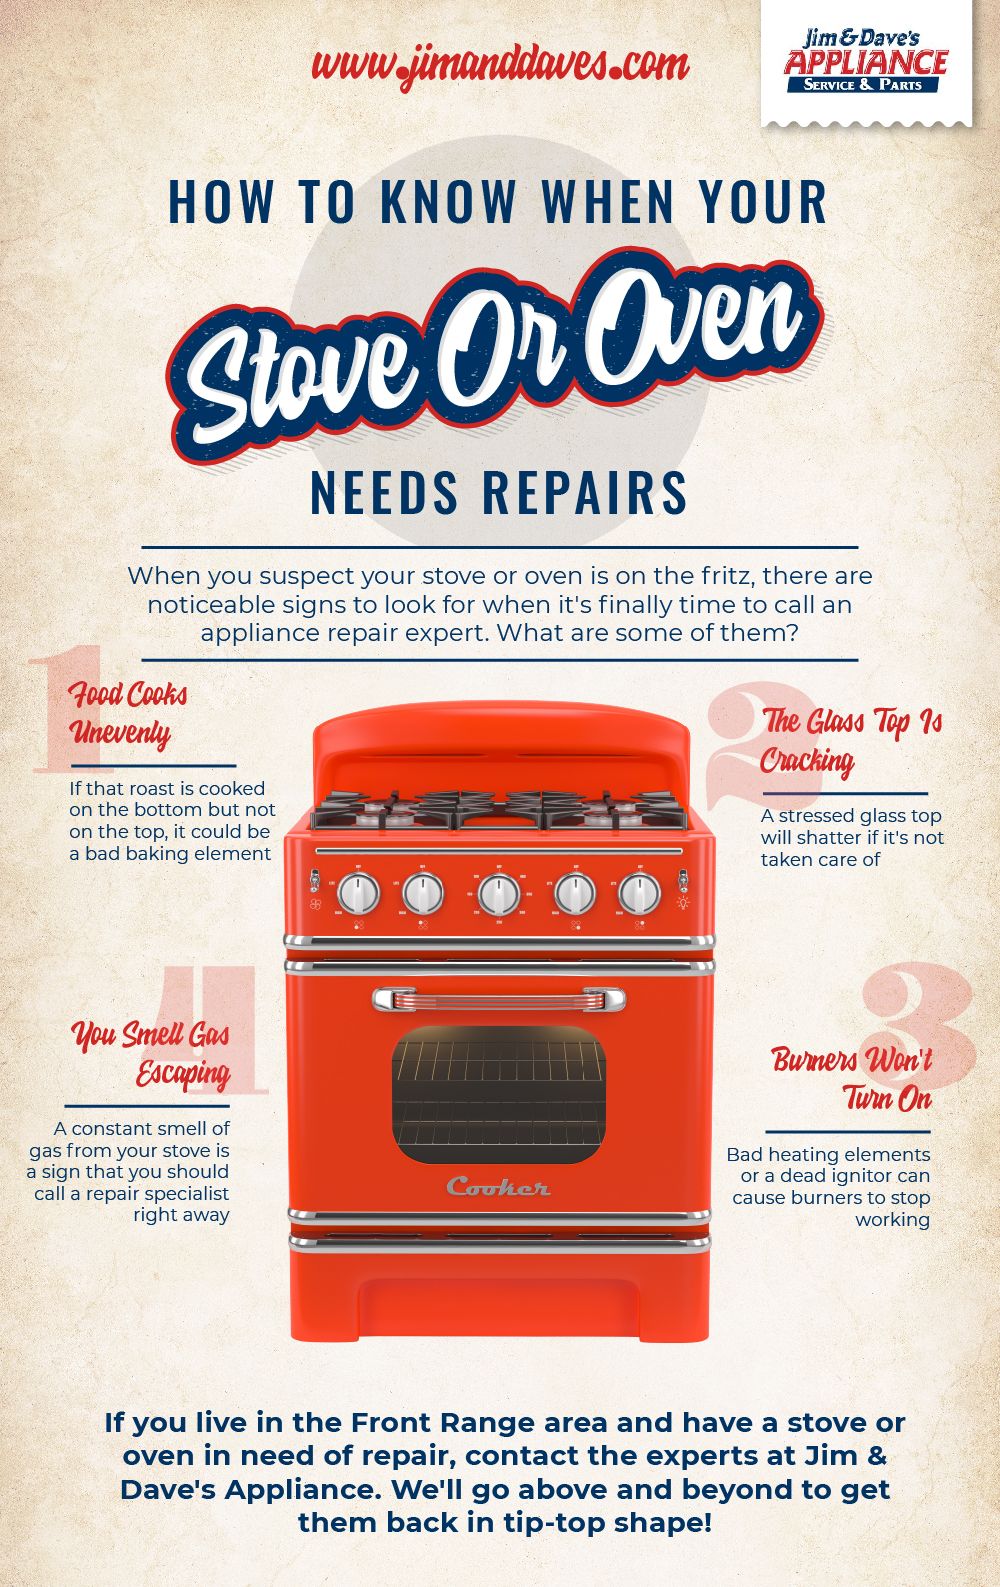 JimDaves-Infographic-Stove-and-Oven-Repair-01-5e76a05999922.jpg